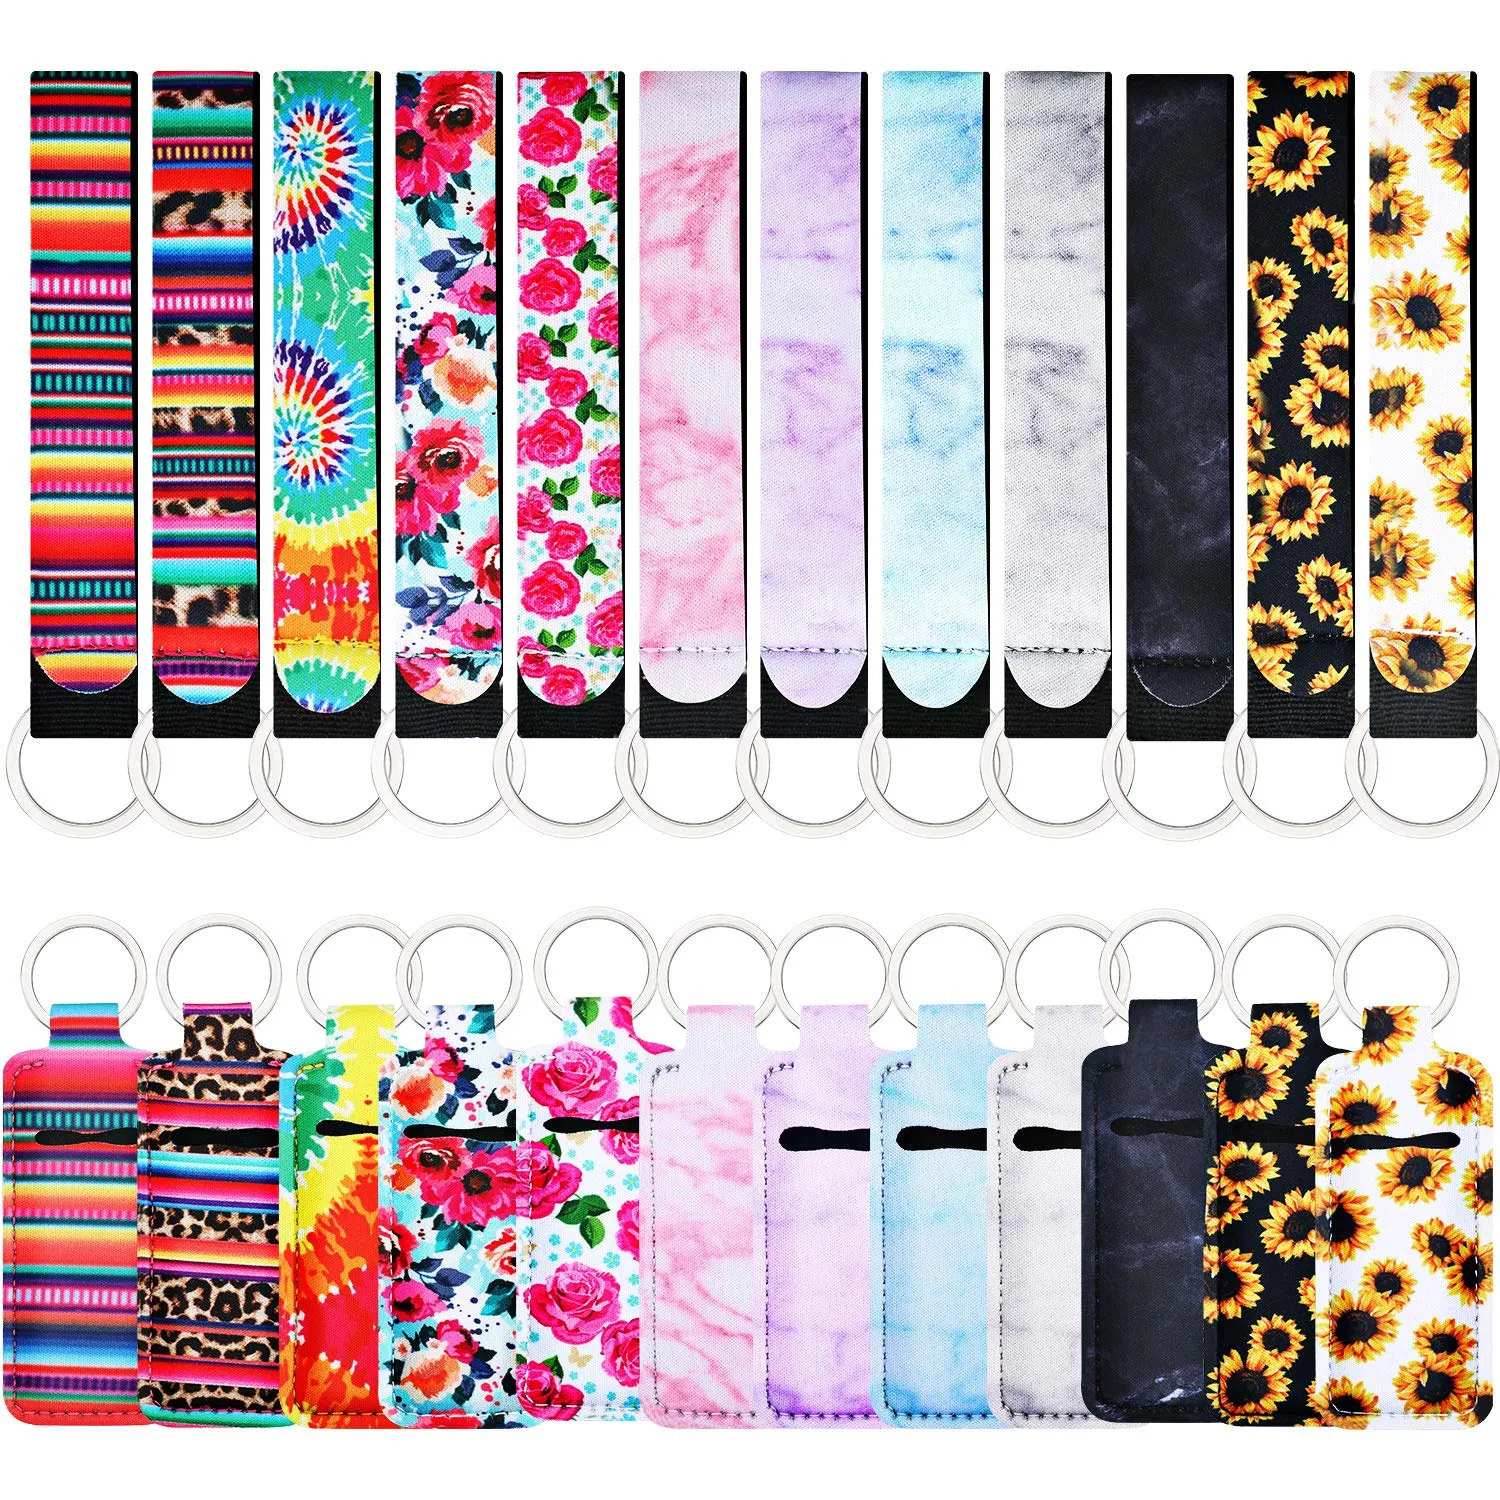 24Pieces Chapstick Keychain Holders Set with Wristlet Lanyards Lipstick Holder Sleeve Pouch Lip Balm Holder for Chapstick